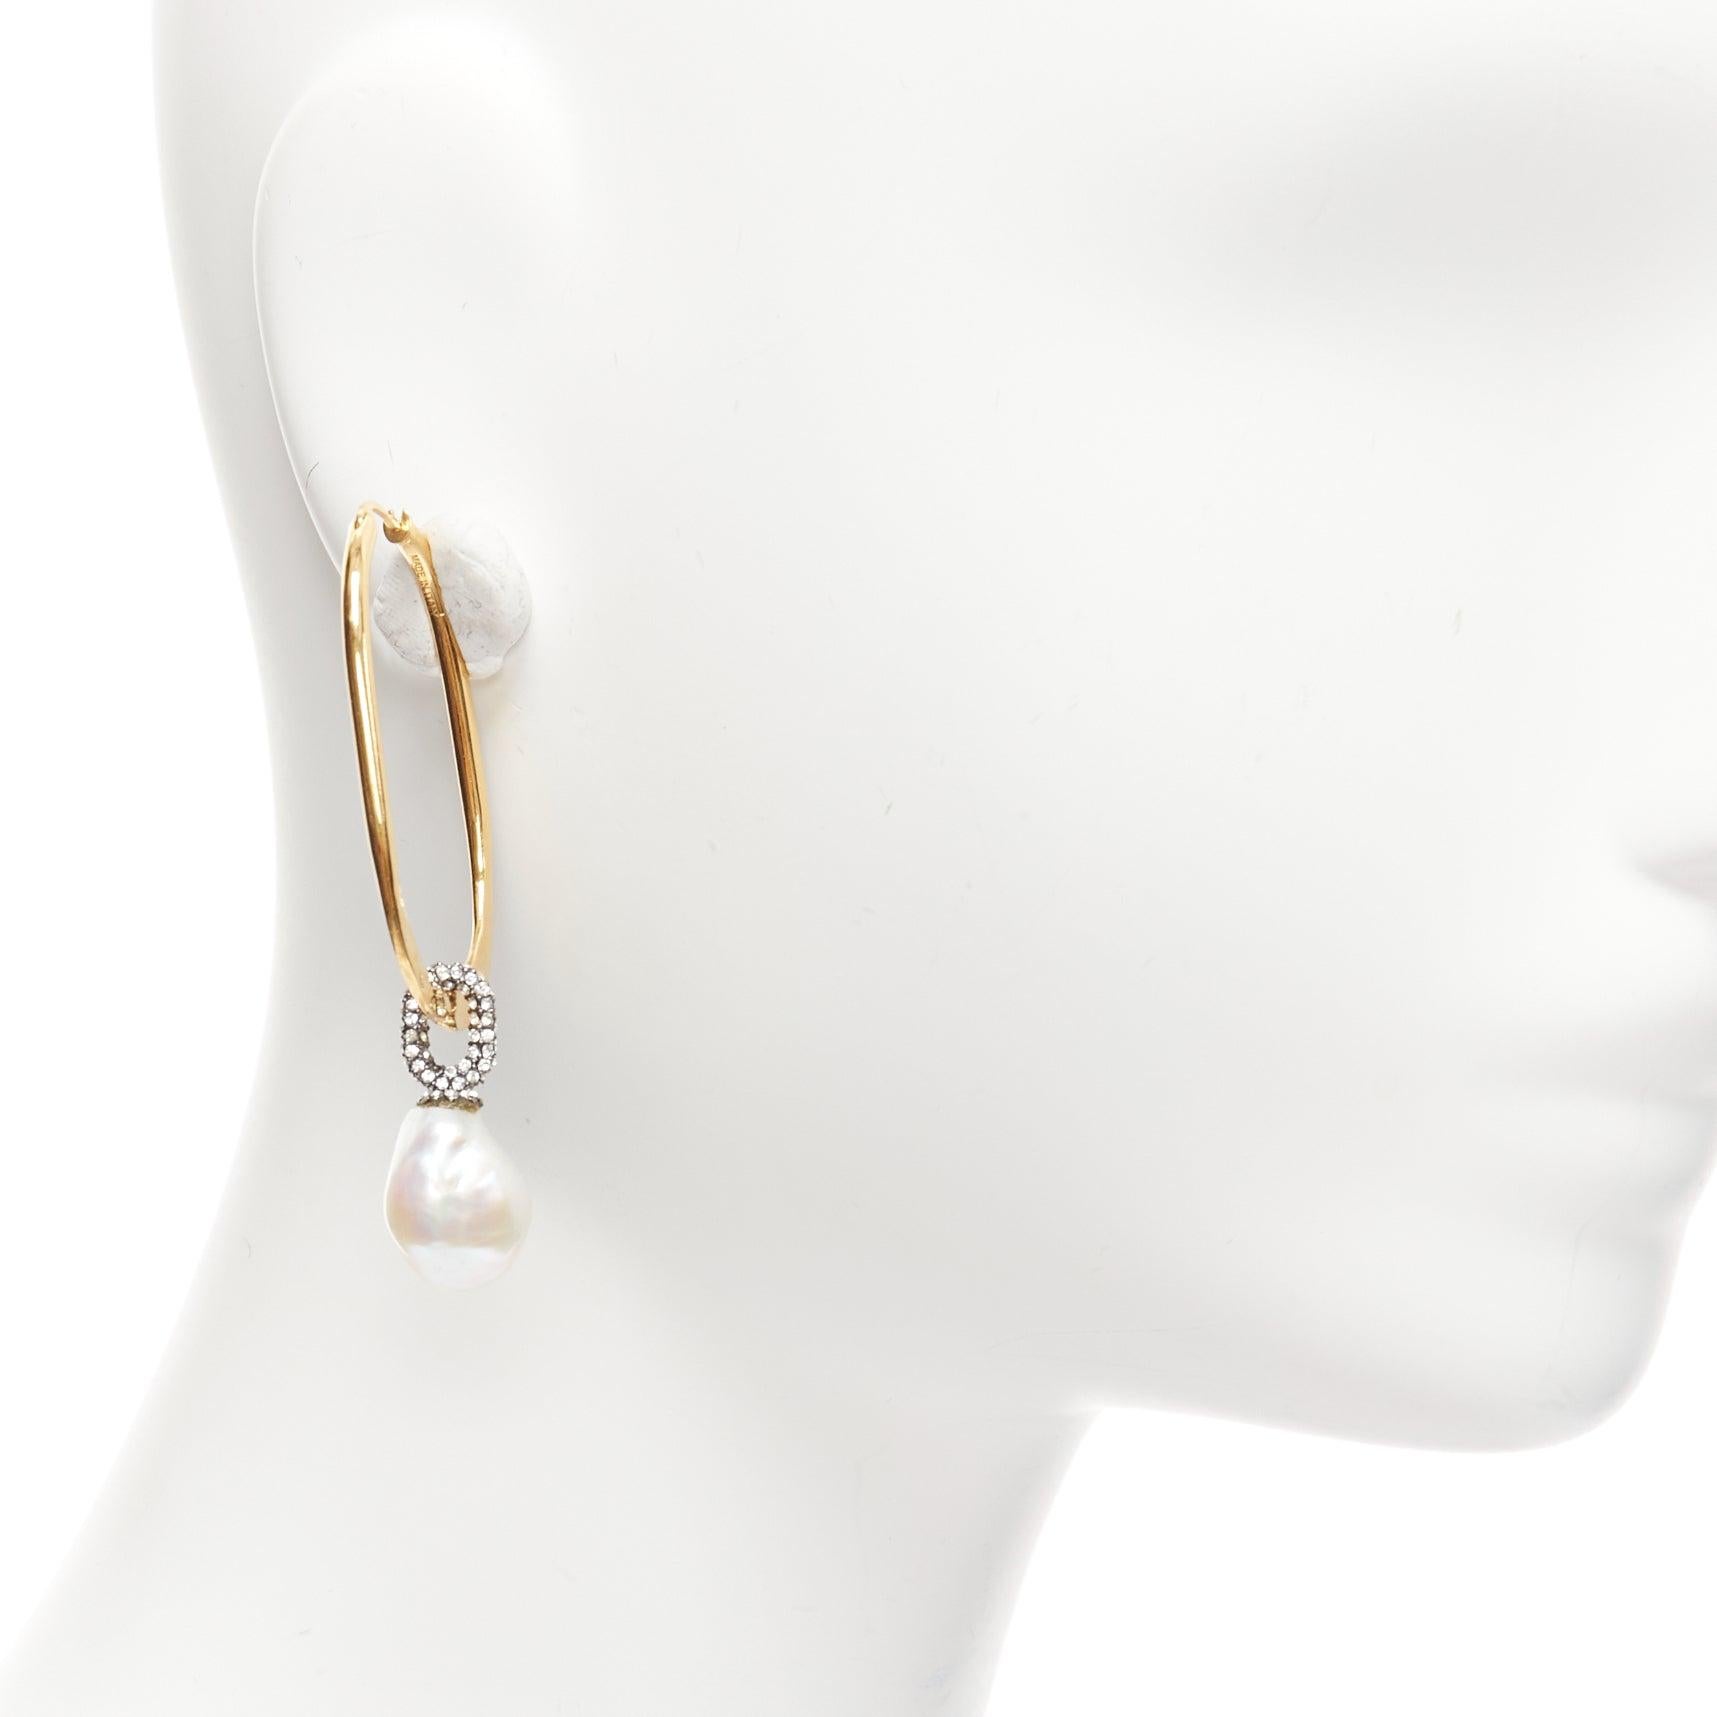 OLD CELINE Baroque Pearl crystal pave gold dangling oval hoop earrings pair
Reference: TGAS/D01109
Brand: Celine
Designer: Phoebe Philo
Material: Metal, Faux Pearl
Color: Gold, Pearl
Pattern: Crystals
Closure: Loop Through
Lining: Gold Metal
Made